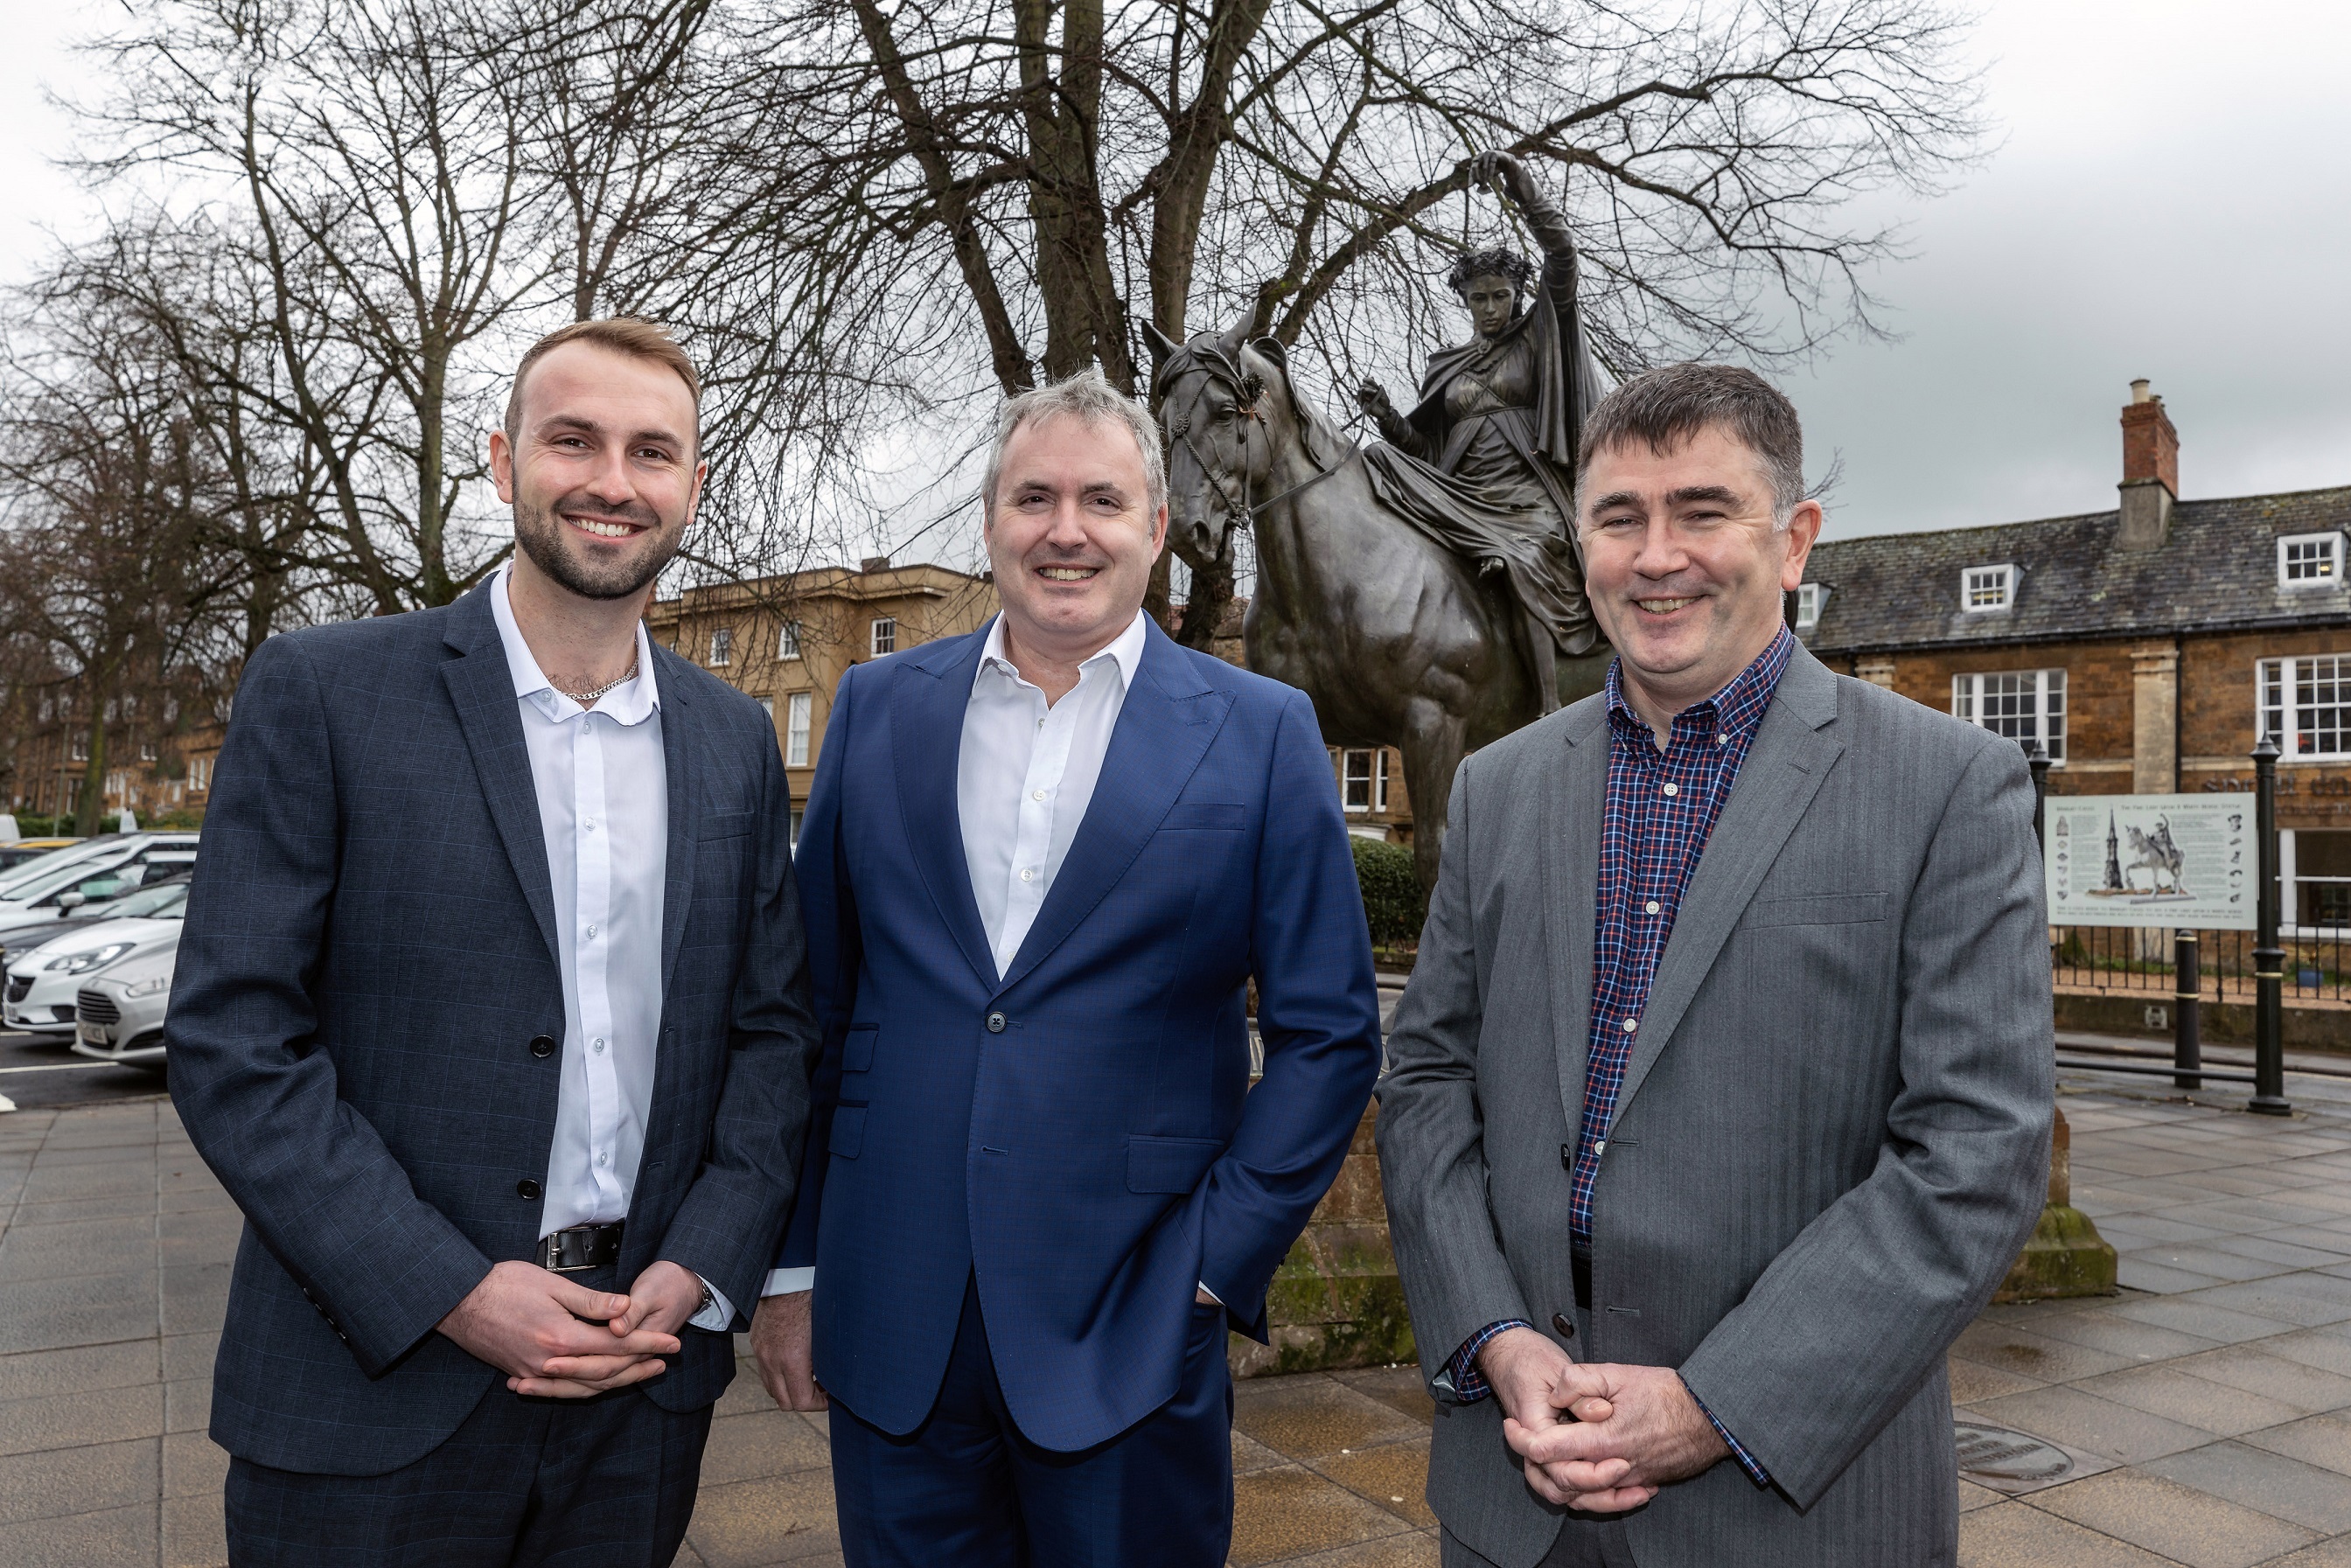 Image to represent The merger of two leading accountancy practices is a welcome boost to Banbury and the surrounding area